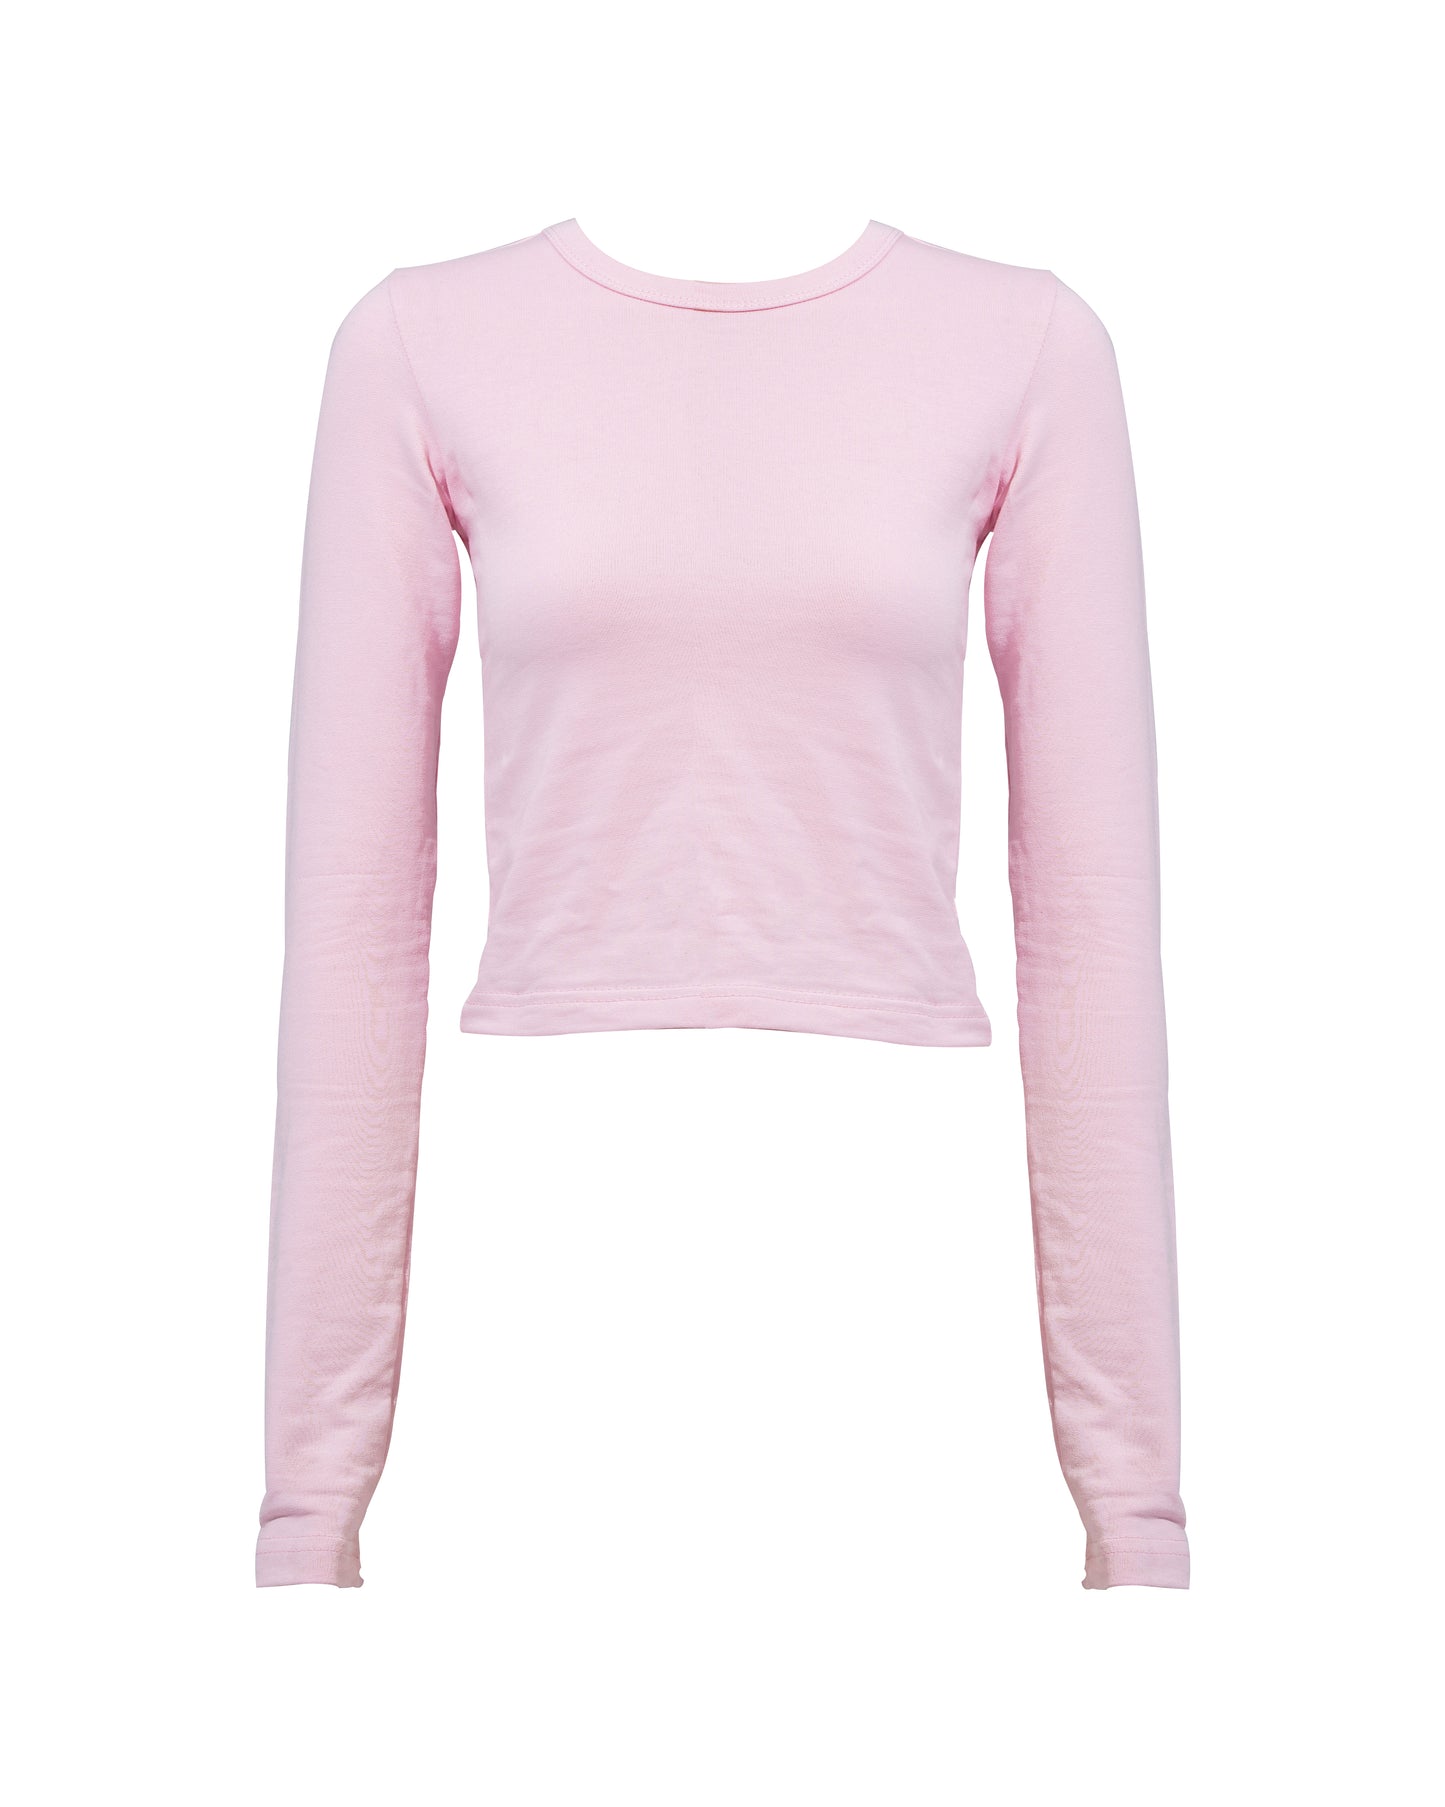 BABY PINK COTTON - LONG SLEEVES TOP